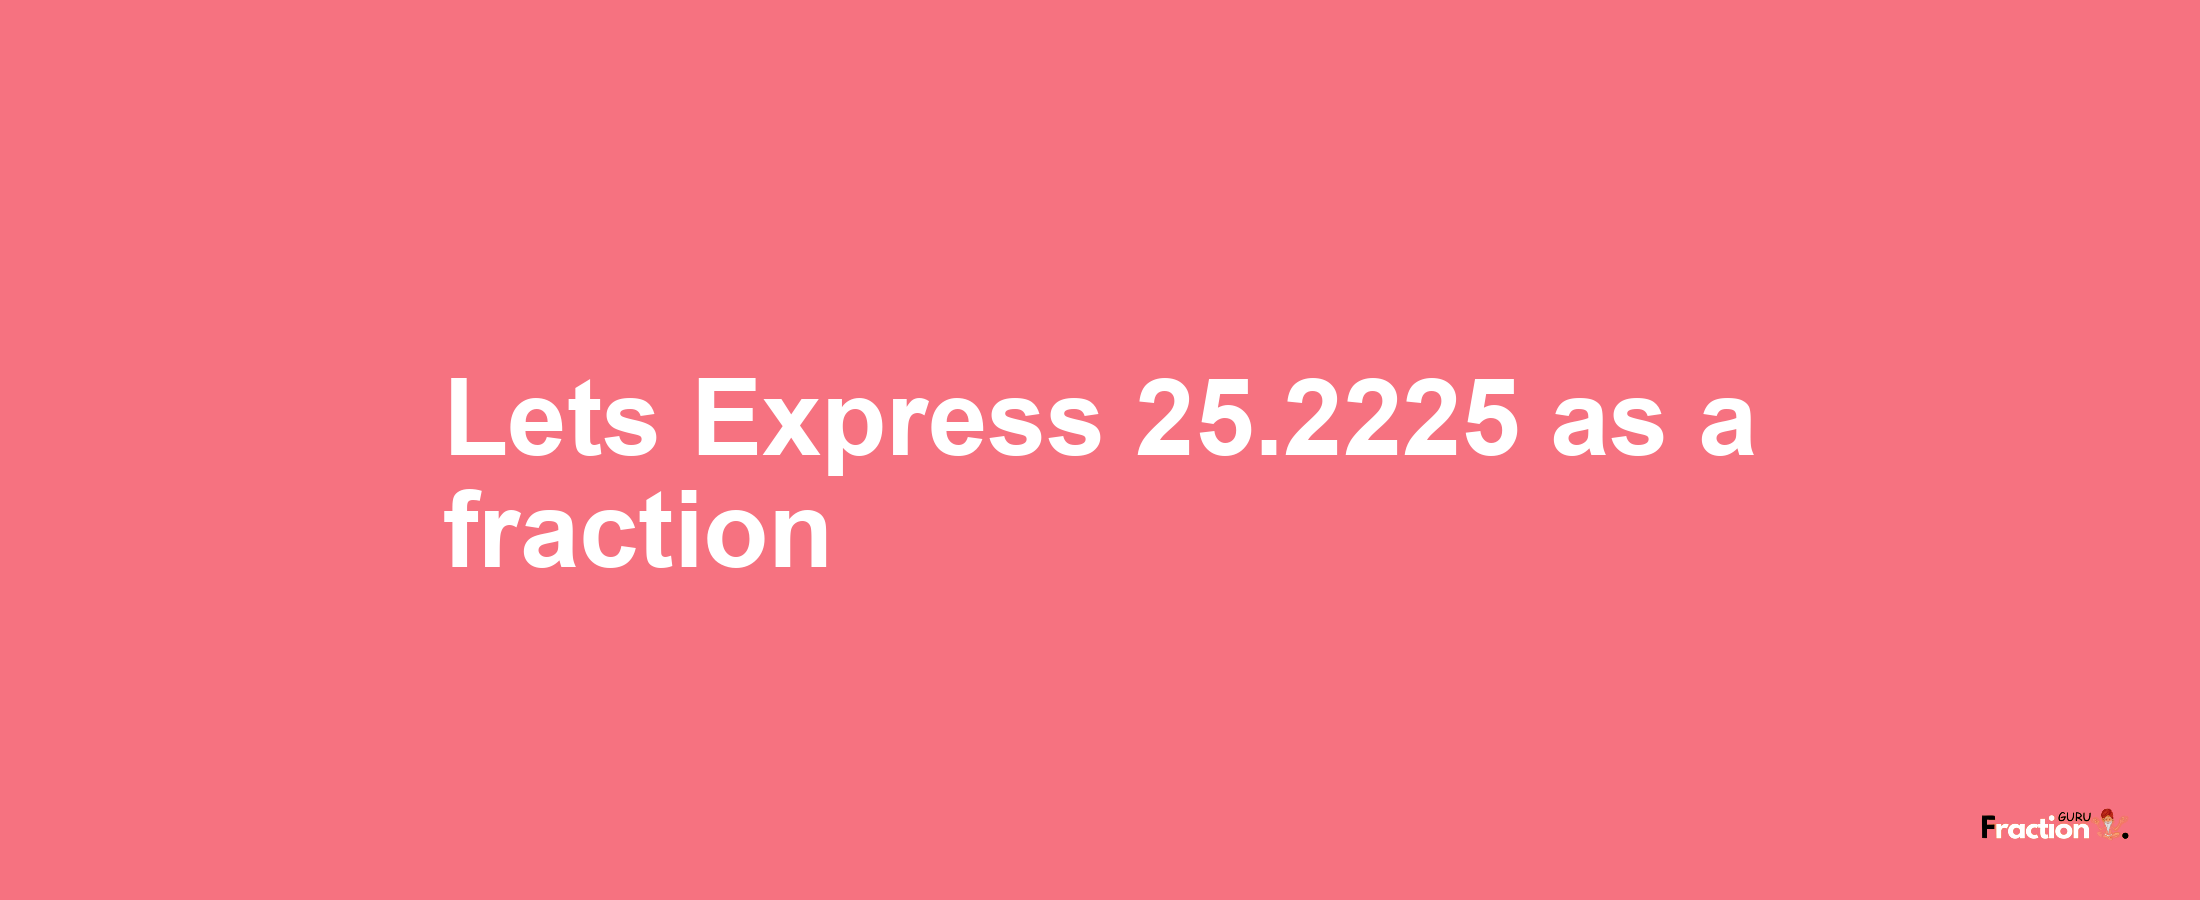 Lets Express 25.2225 as afraction